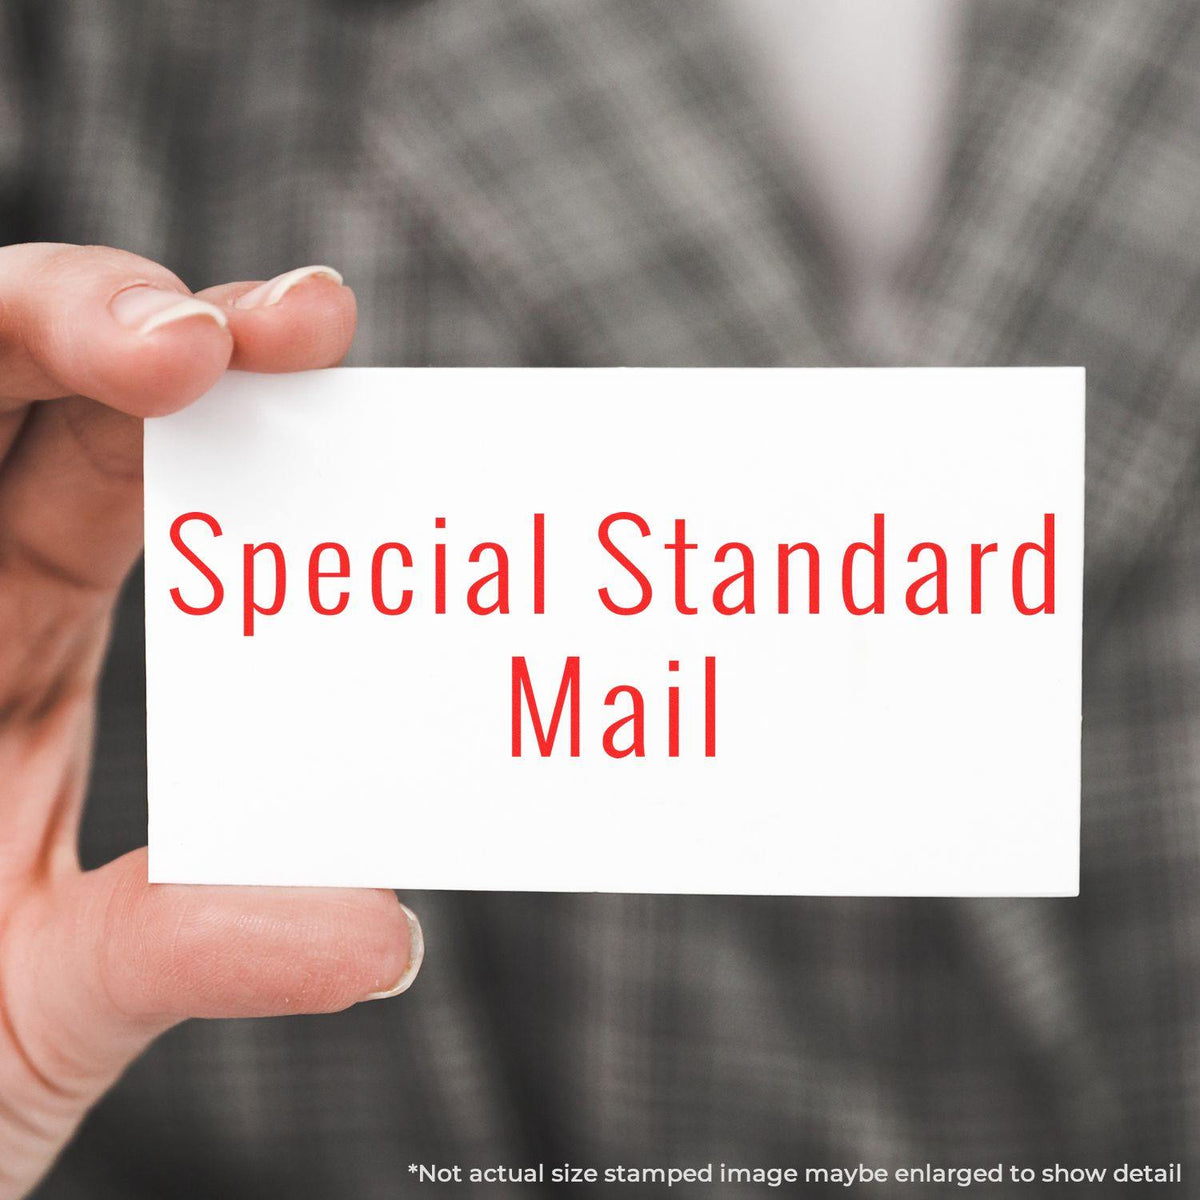 In Use Large Pre-Inked Special Standard Mail Stamp Image